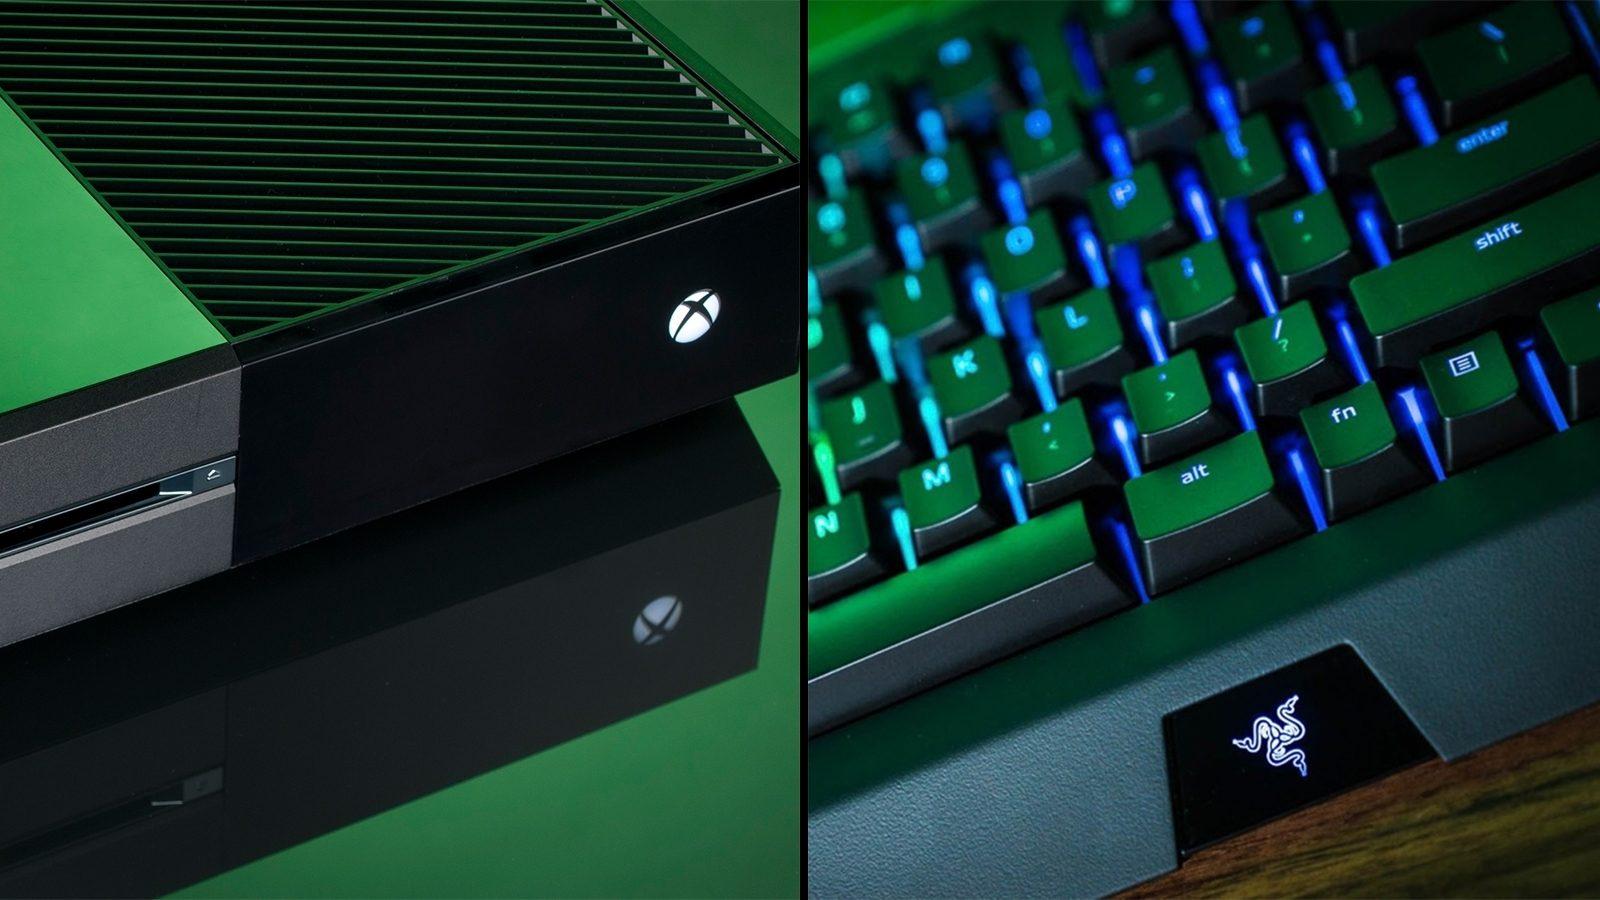 Xbox Cloud gaming is all set to receive keyboard and mouse support soon